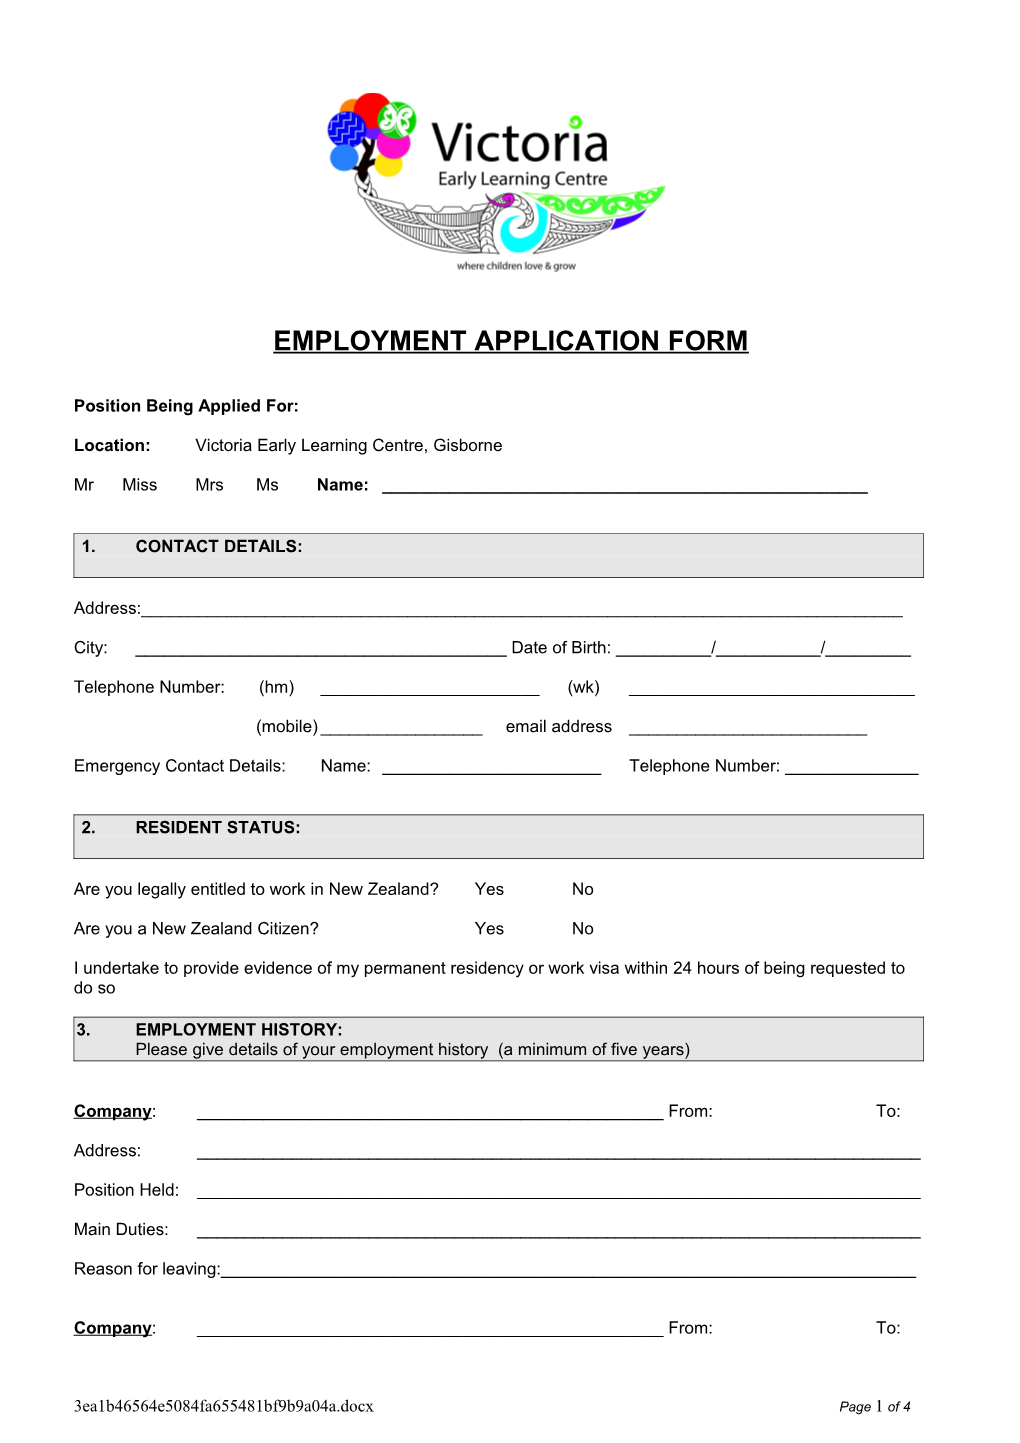 Position Being Applied For